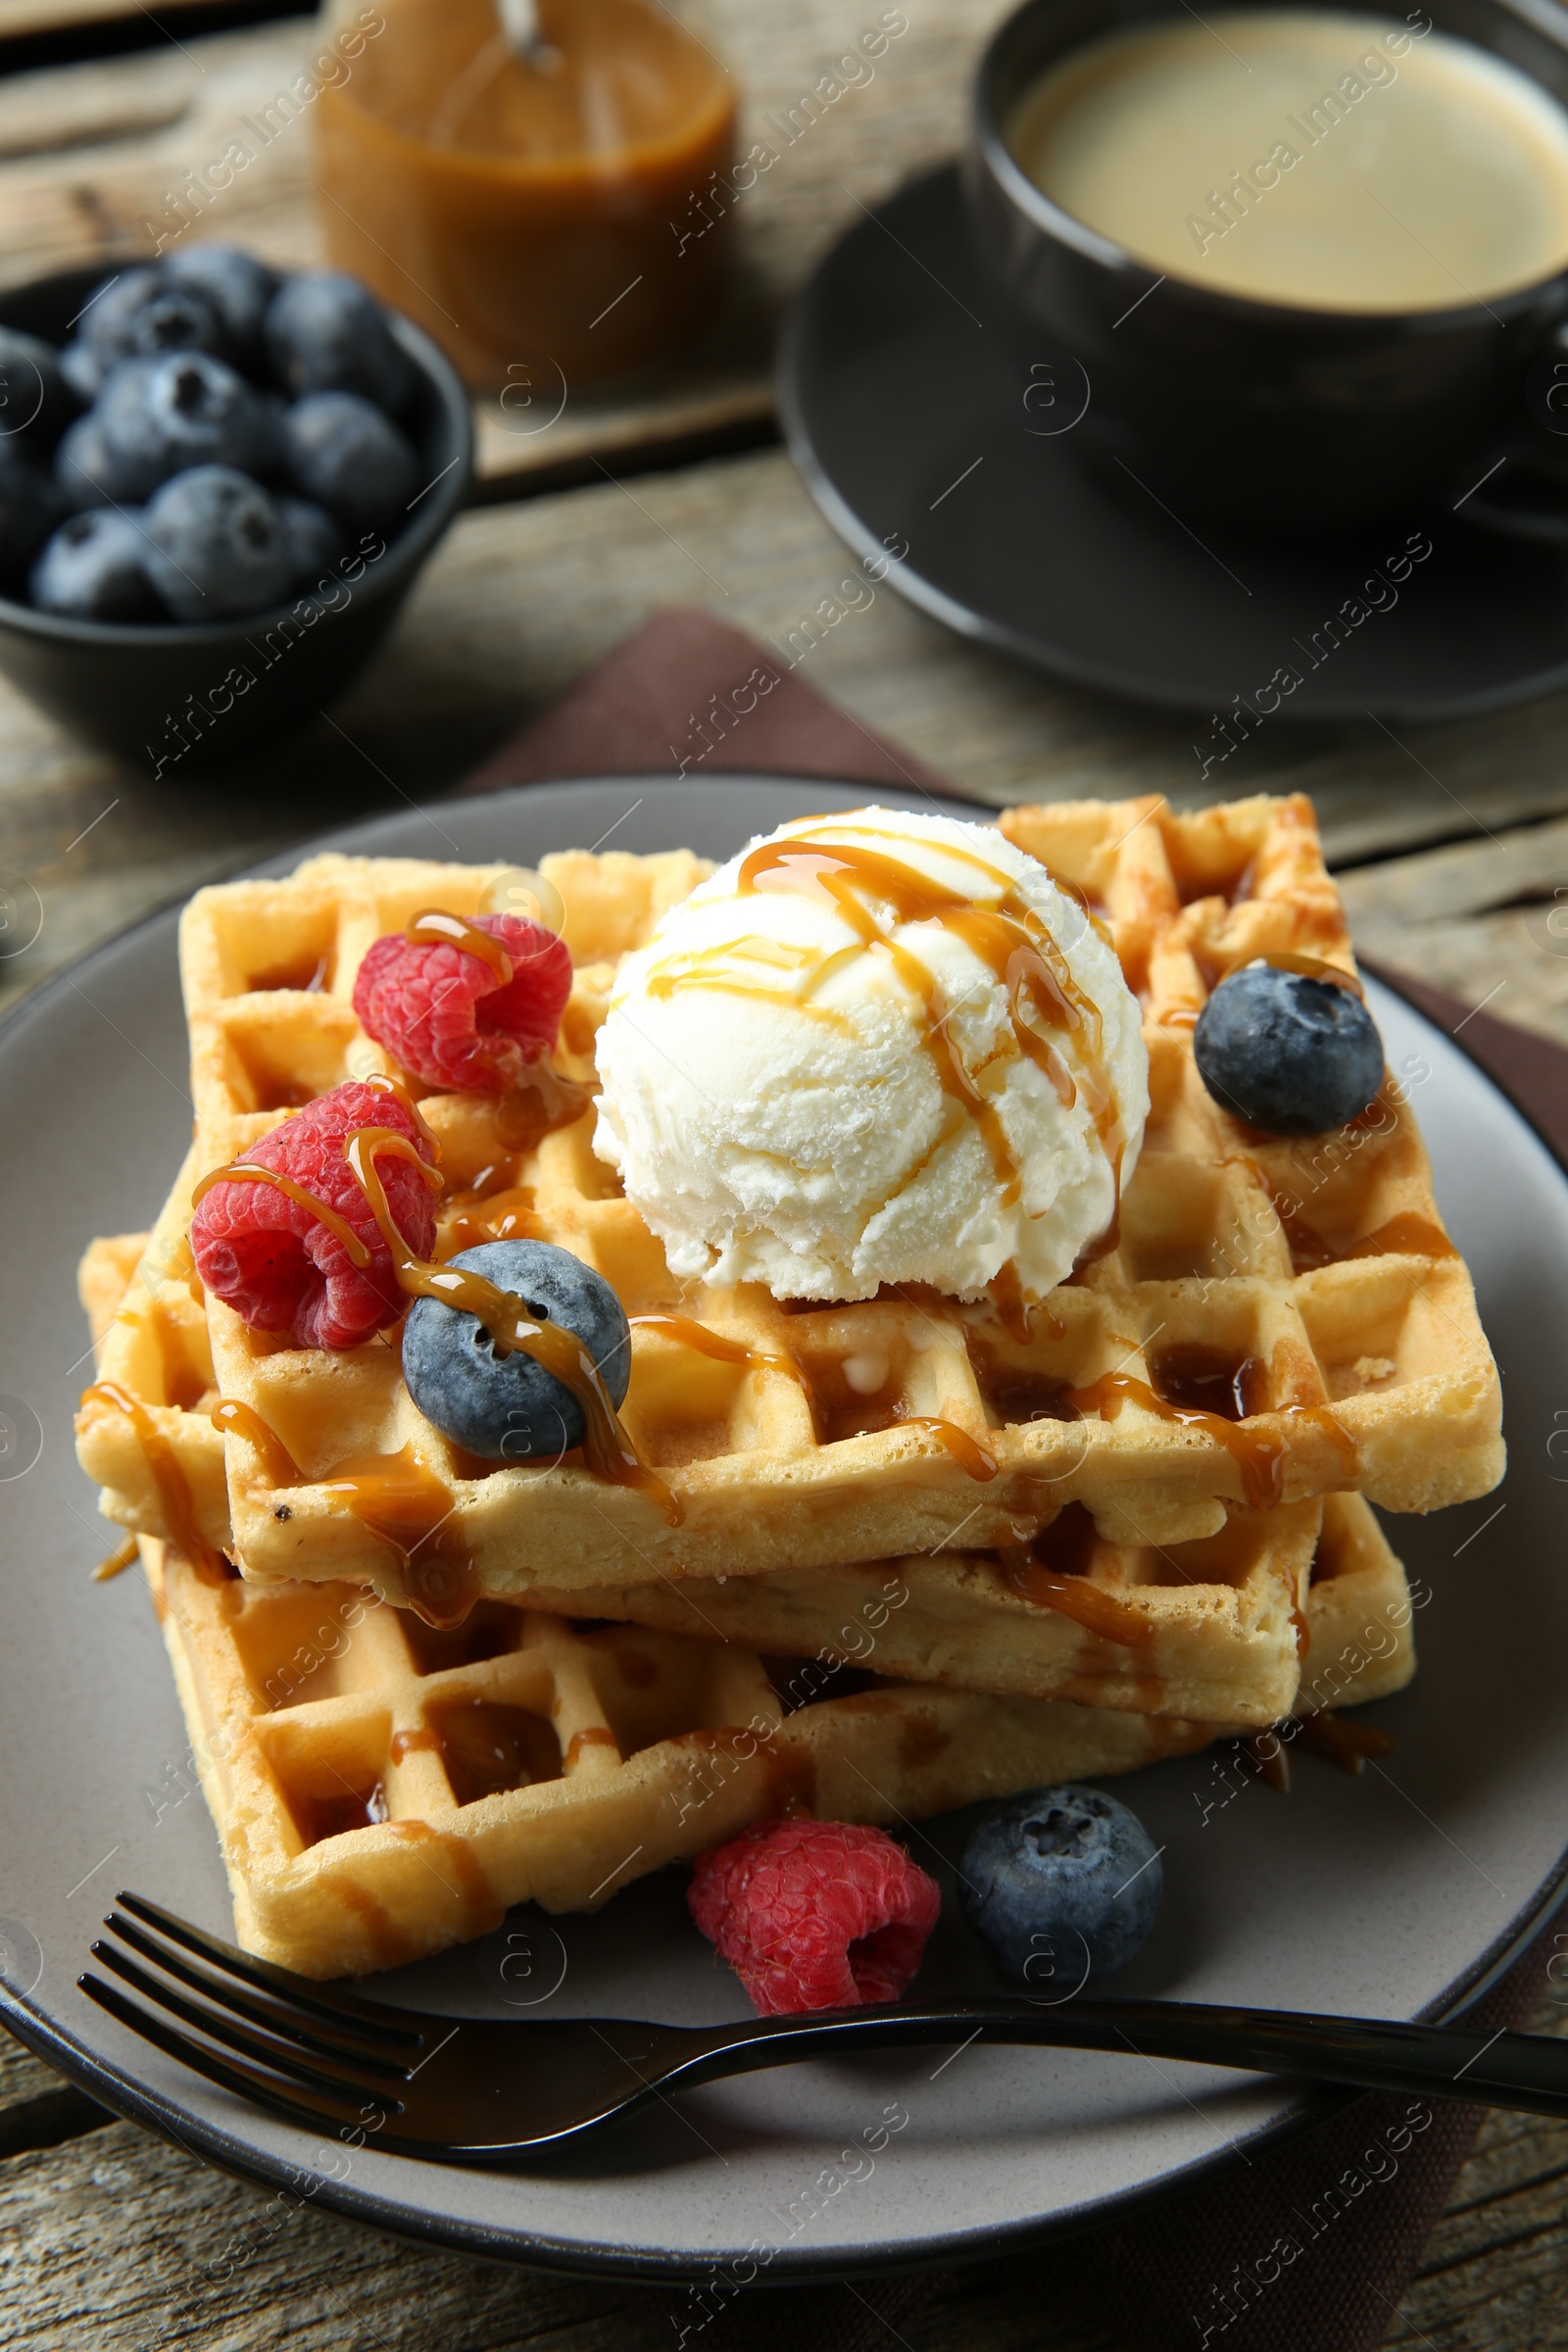 Photo of Delicious Belgian waffles with ice cream, berries and caramel sauce served on wooden table, closeup